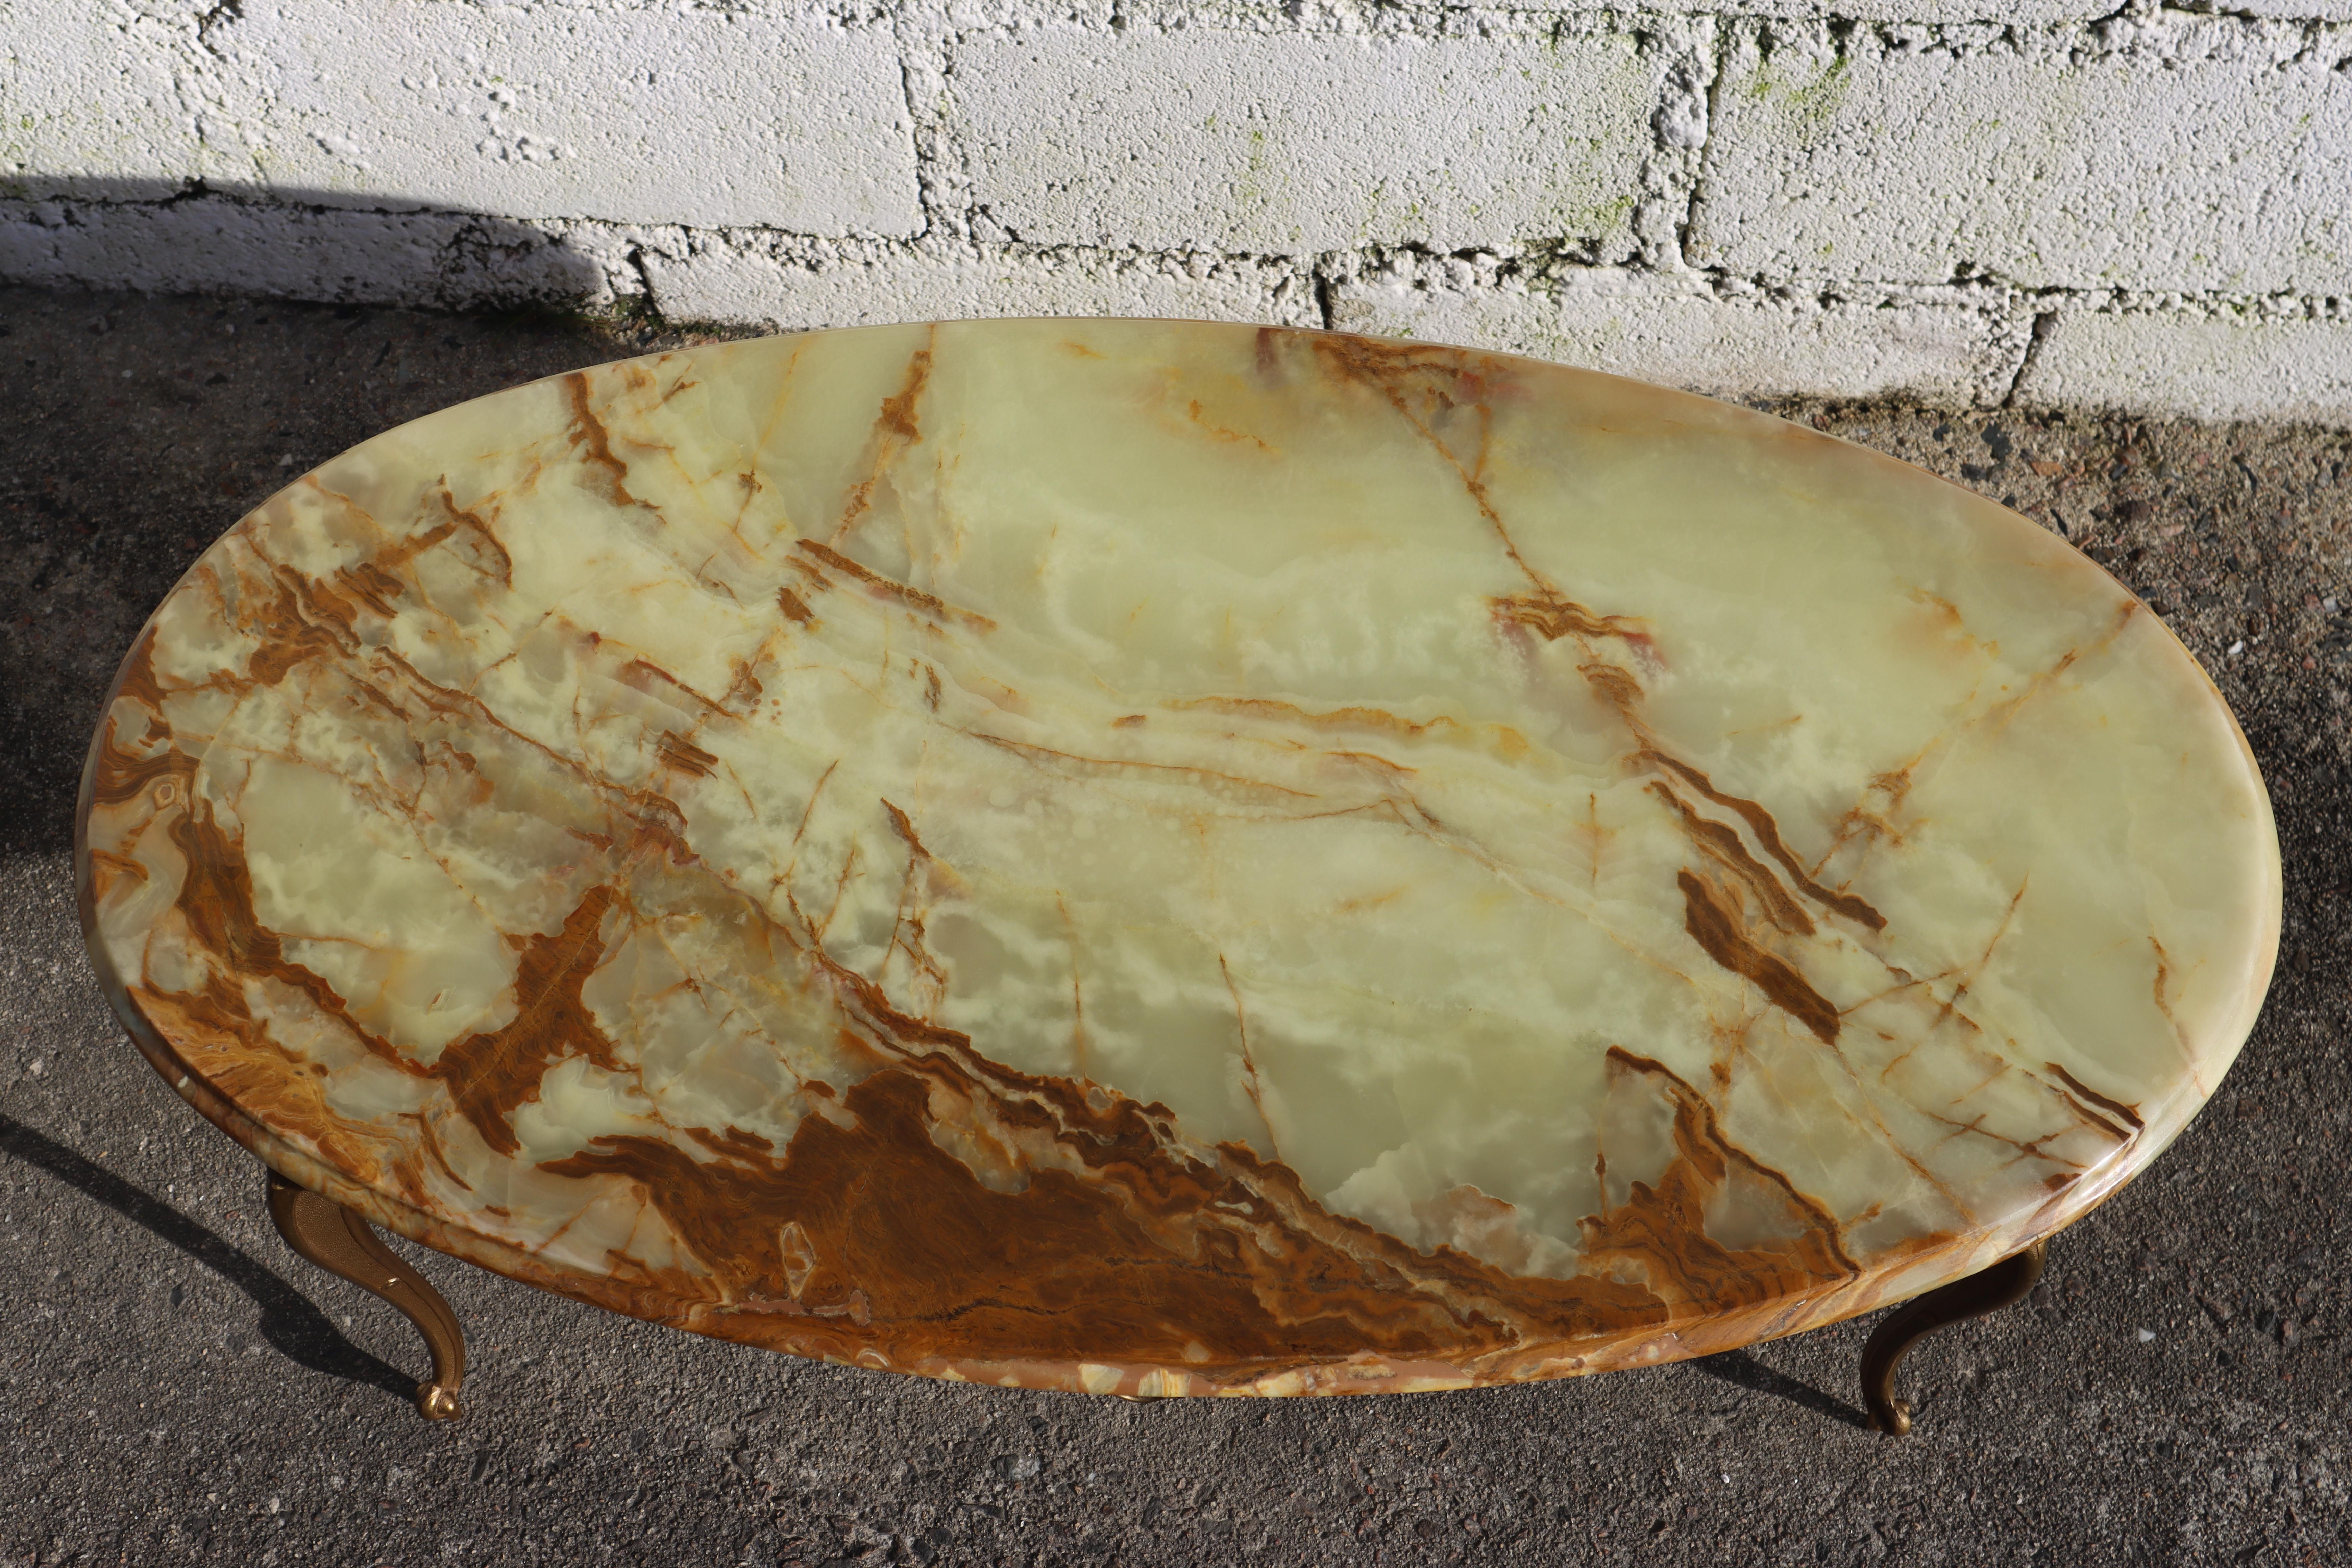 Wonderful French Vintage green Onyx Marble and Brass Coffee Table - Lounge Table Style Louis XV from the 60s
Oval Marble Top all-round decorative Edge
Splendid Colors : mother-of-pearl, mint,jade, brown,ocher orange a real colorful spectacle
Elegant